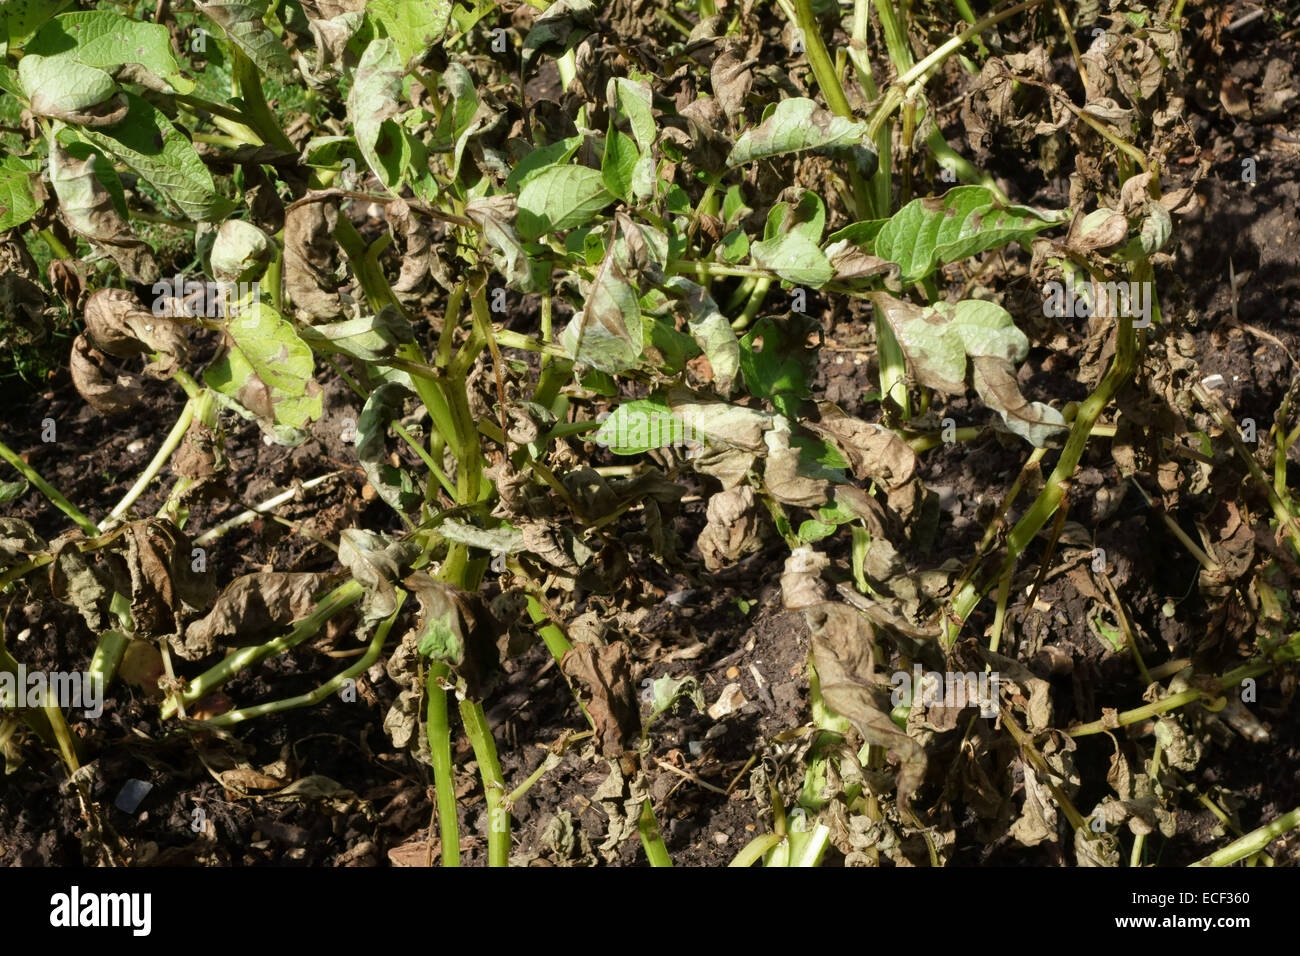 Potato late blight, Phytophthora infestans, damage to potato plants in a vegetable plot, Hampshire, August Stock Photo